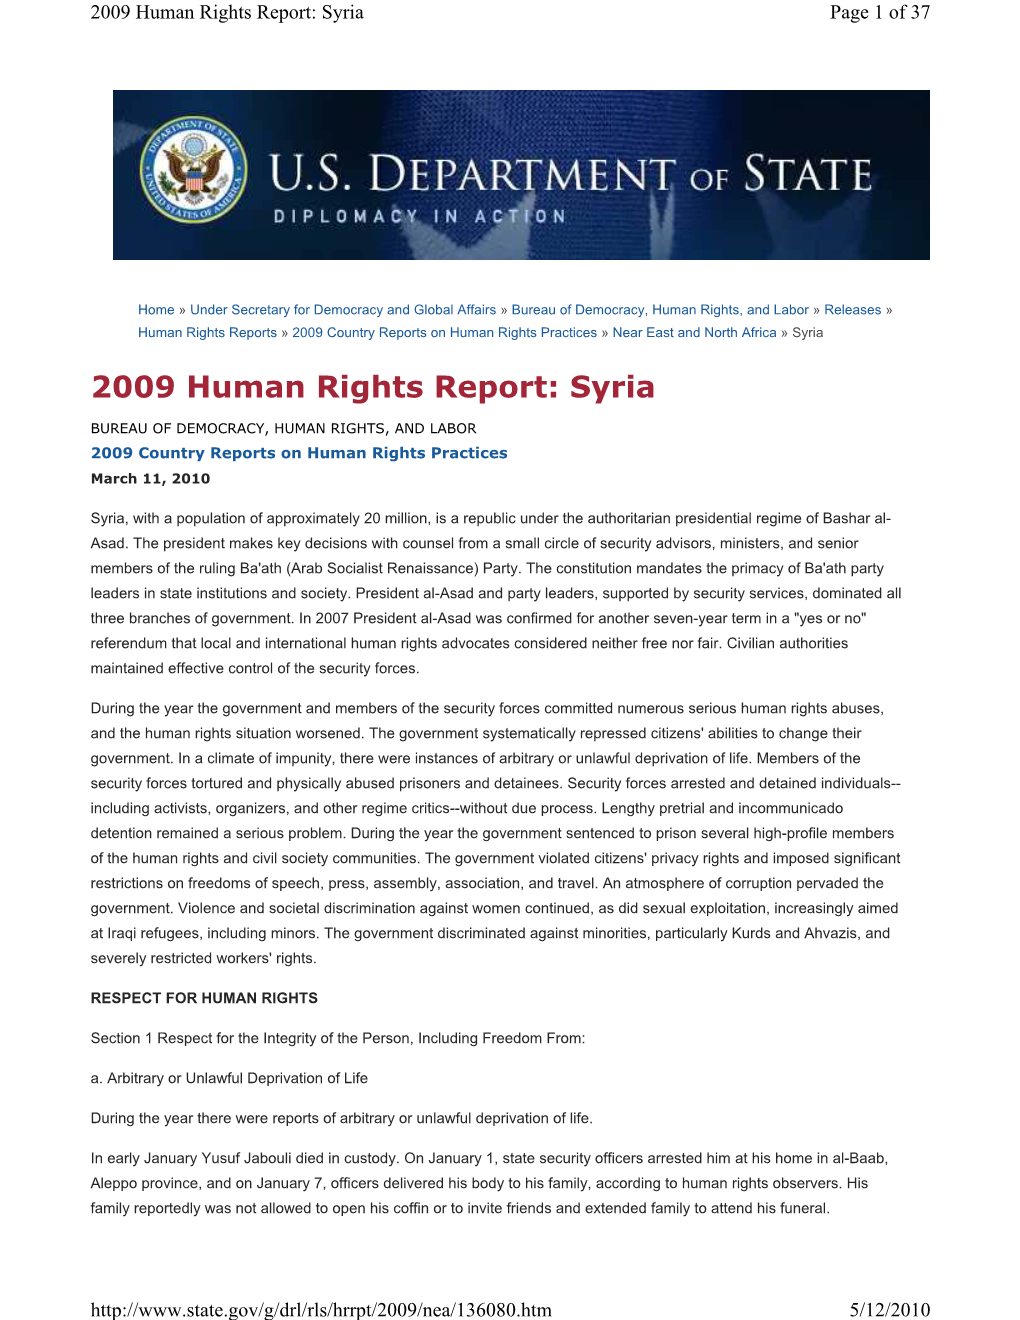 Syria Page 1 of 37